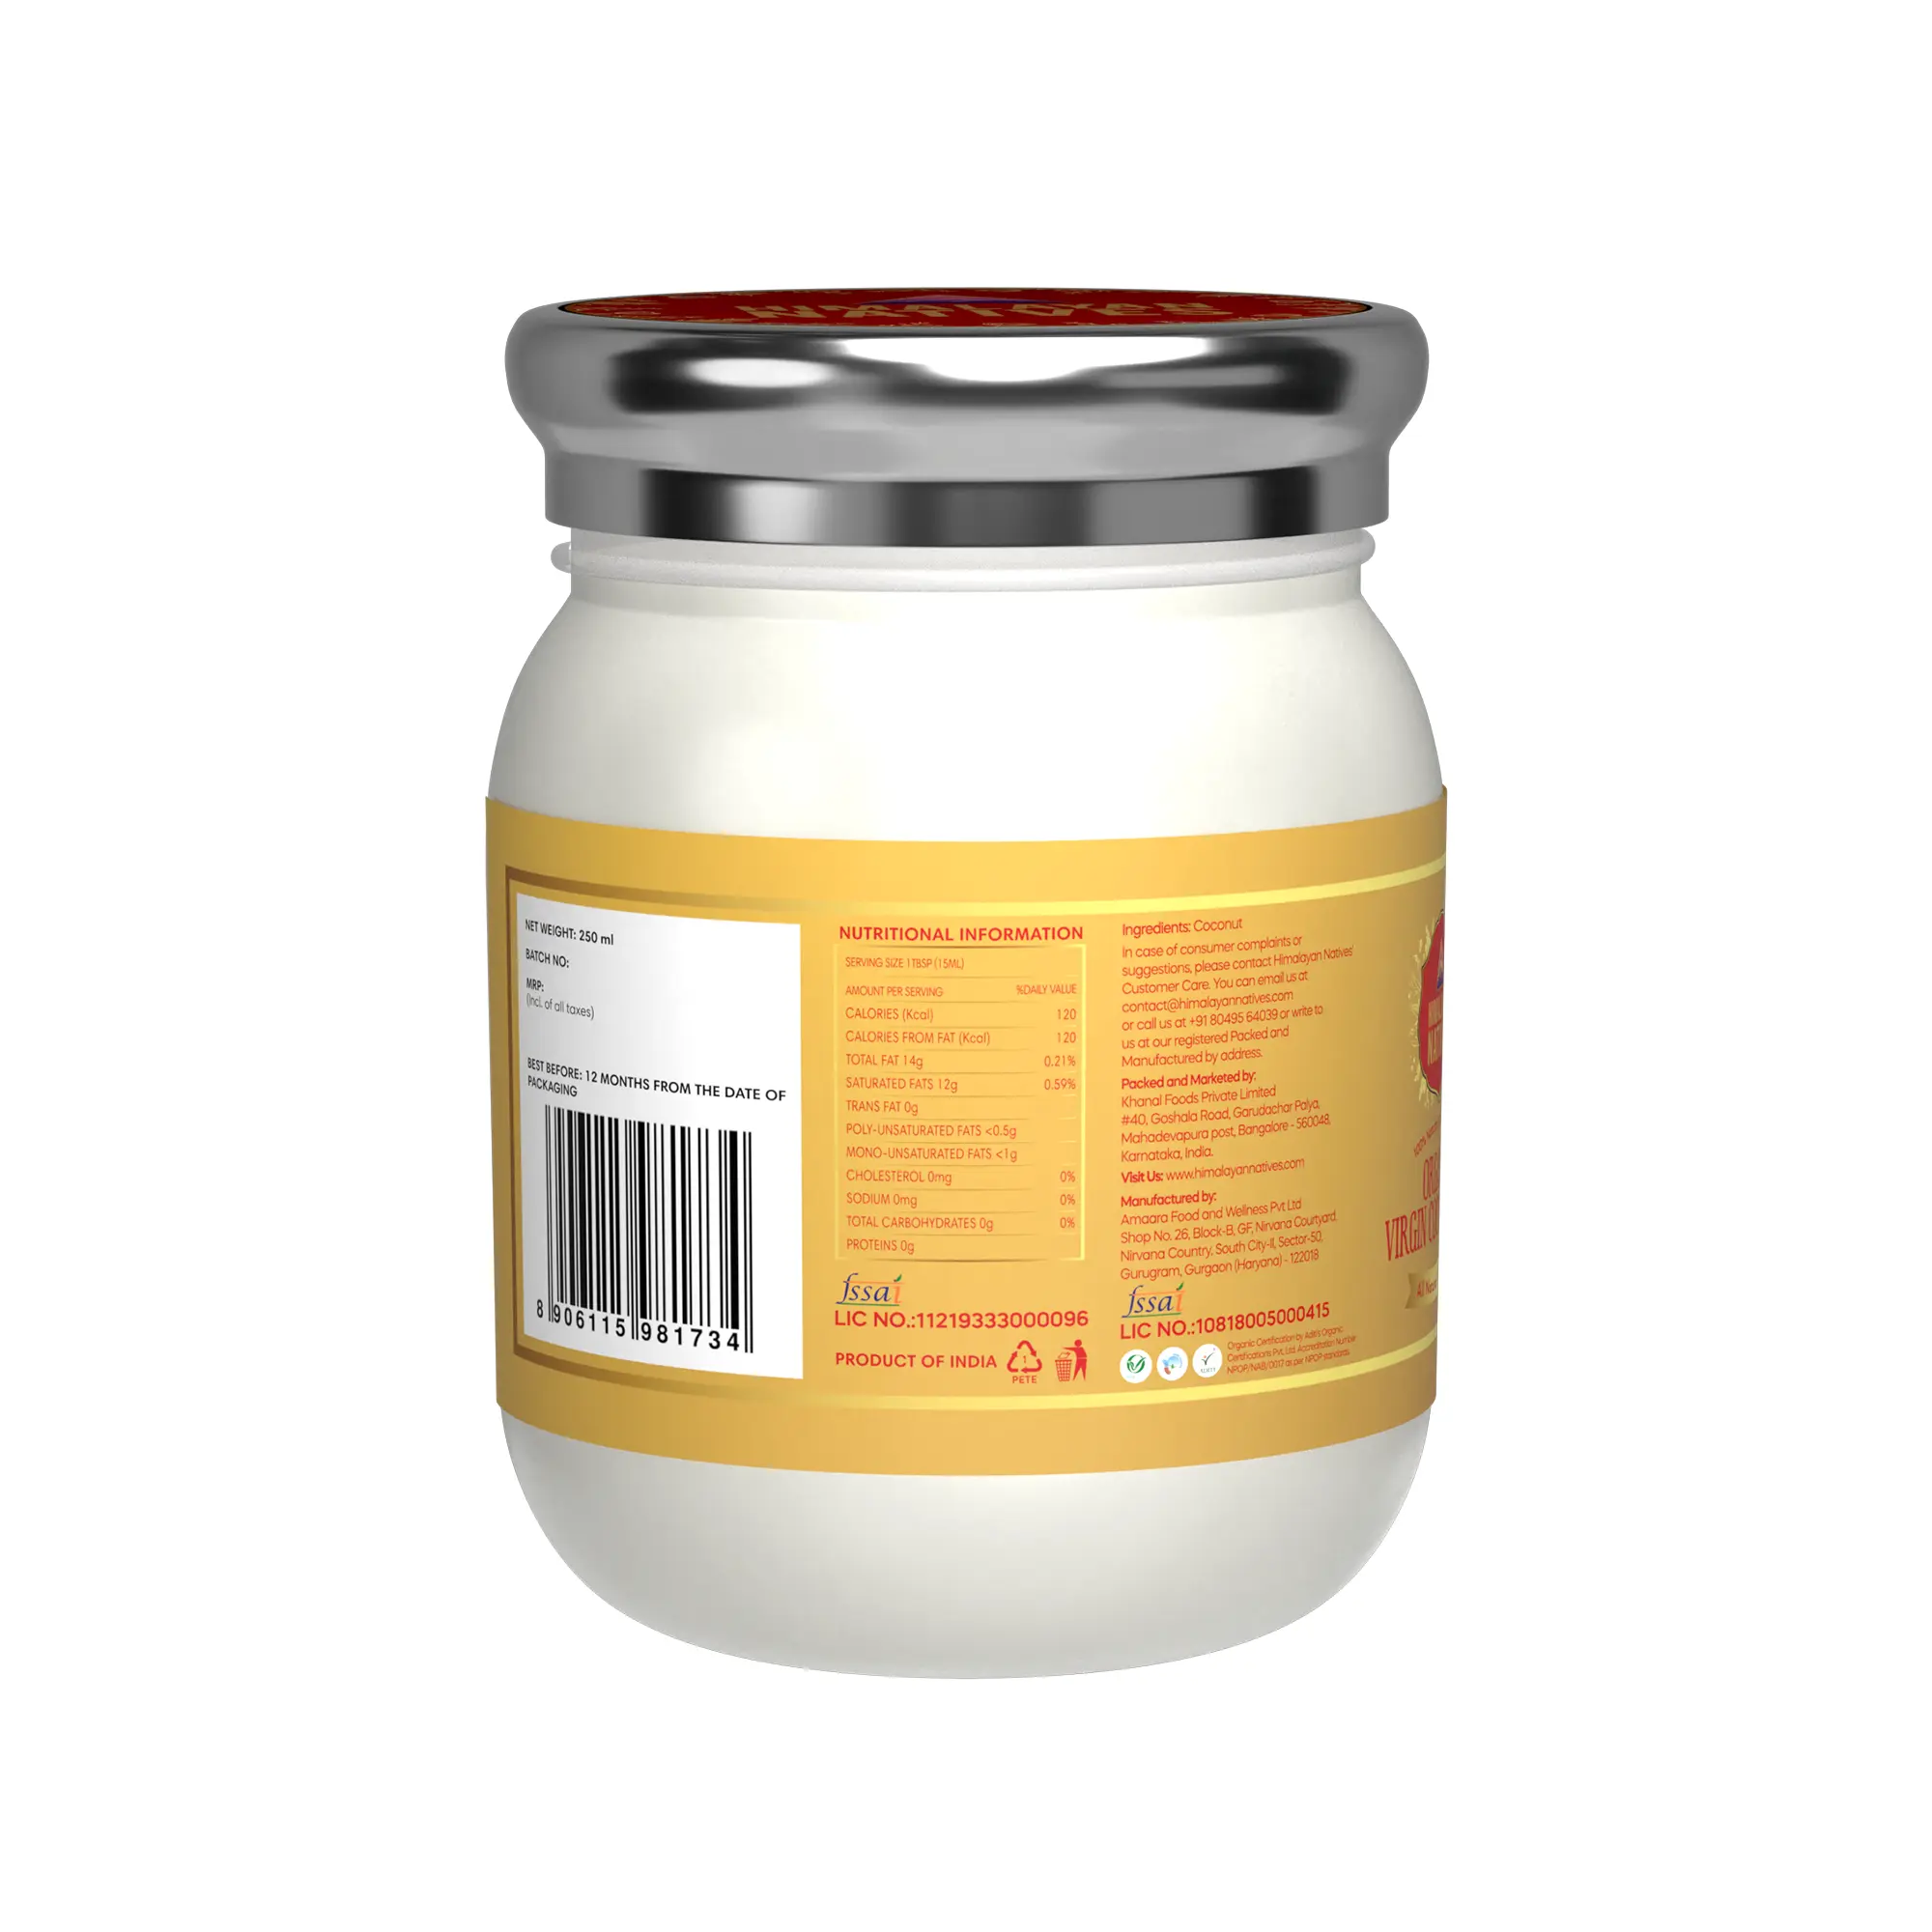 Product Specification - Organic Virgin Coconut Oil